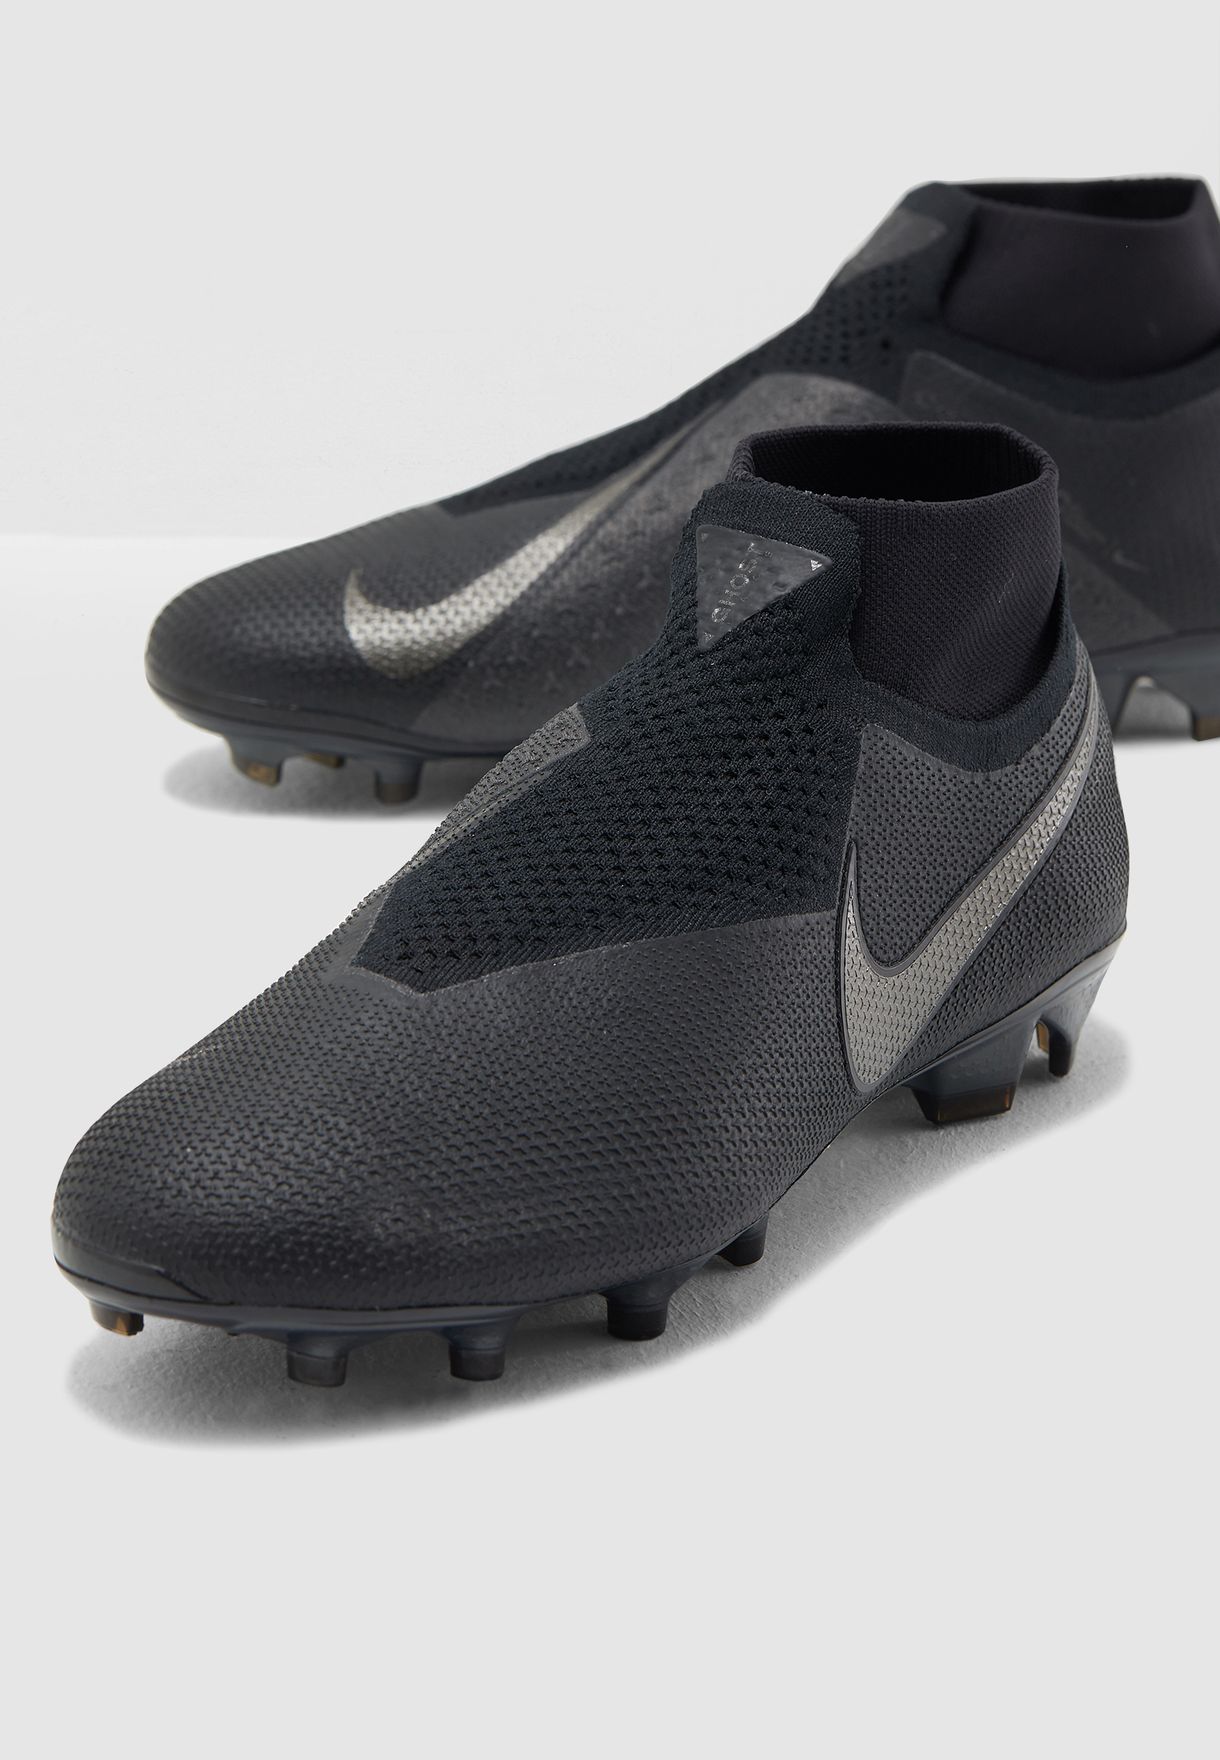 The Nike Phantom Vision Elite By You Soccer Cleat Pinterest